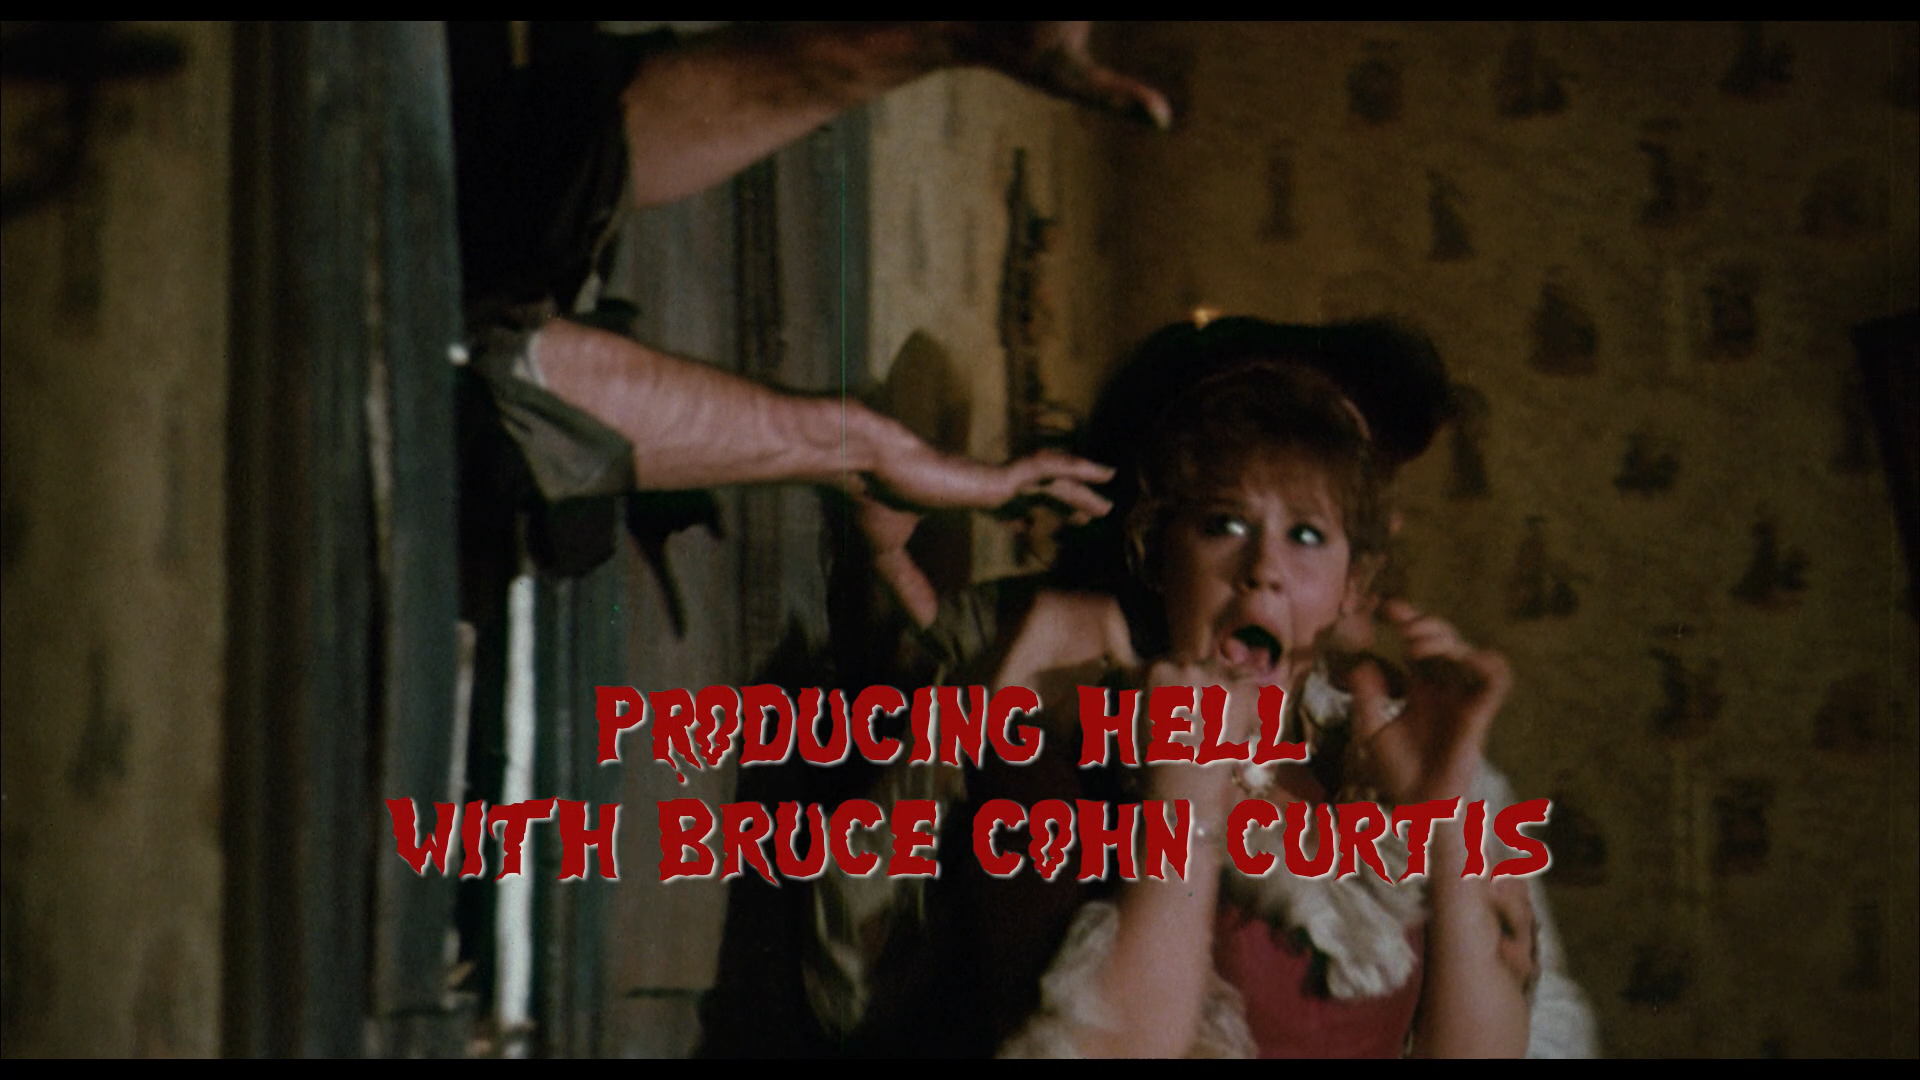 Producing Hell with Bruce Cohn Curtis